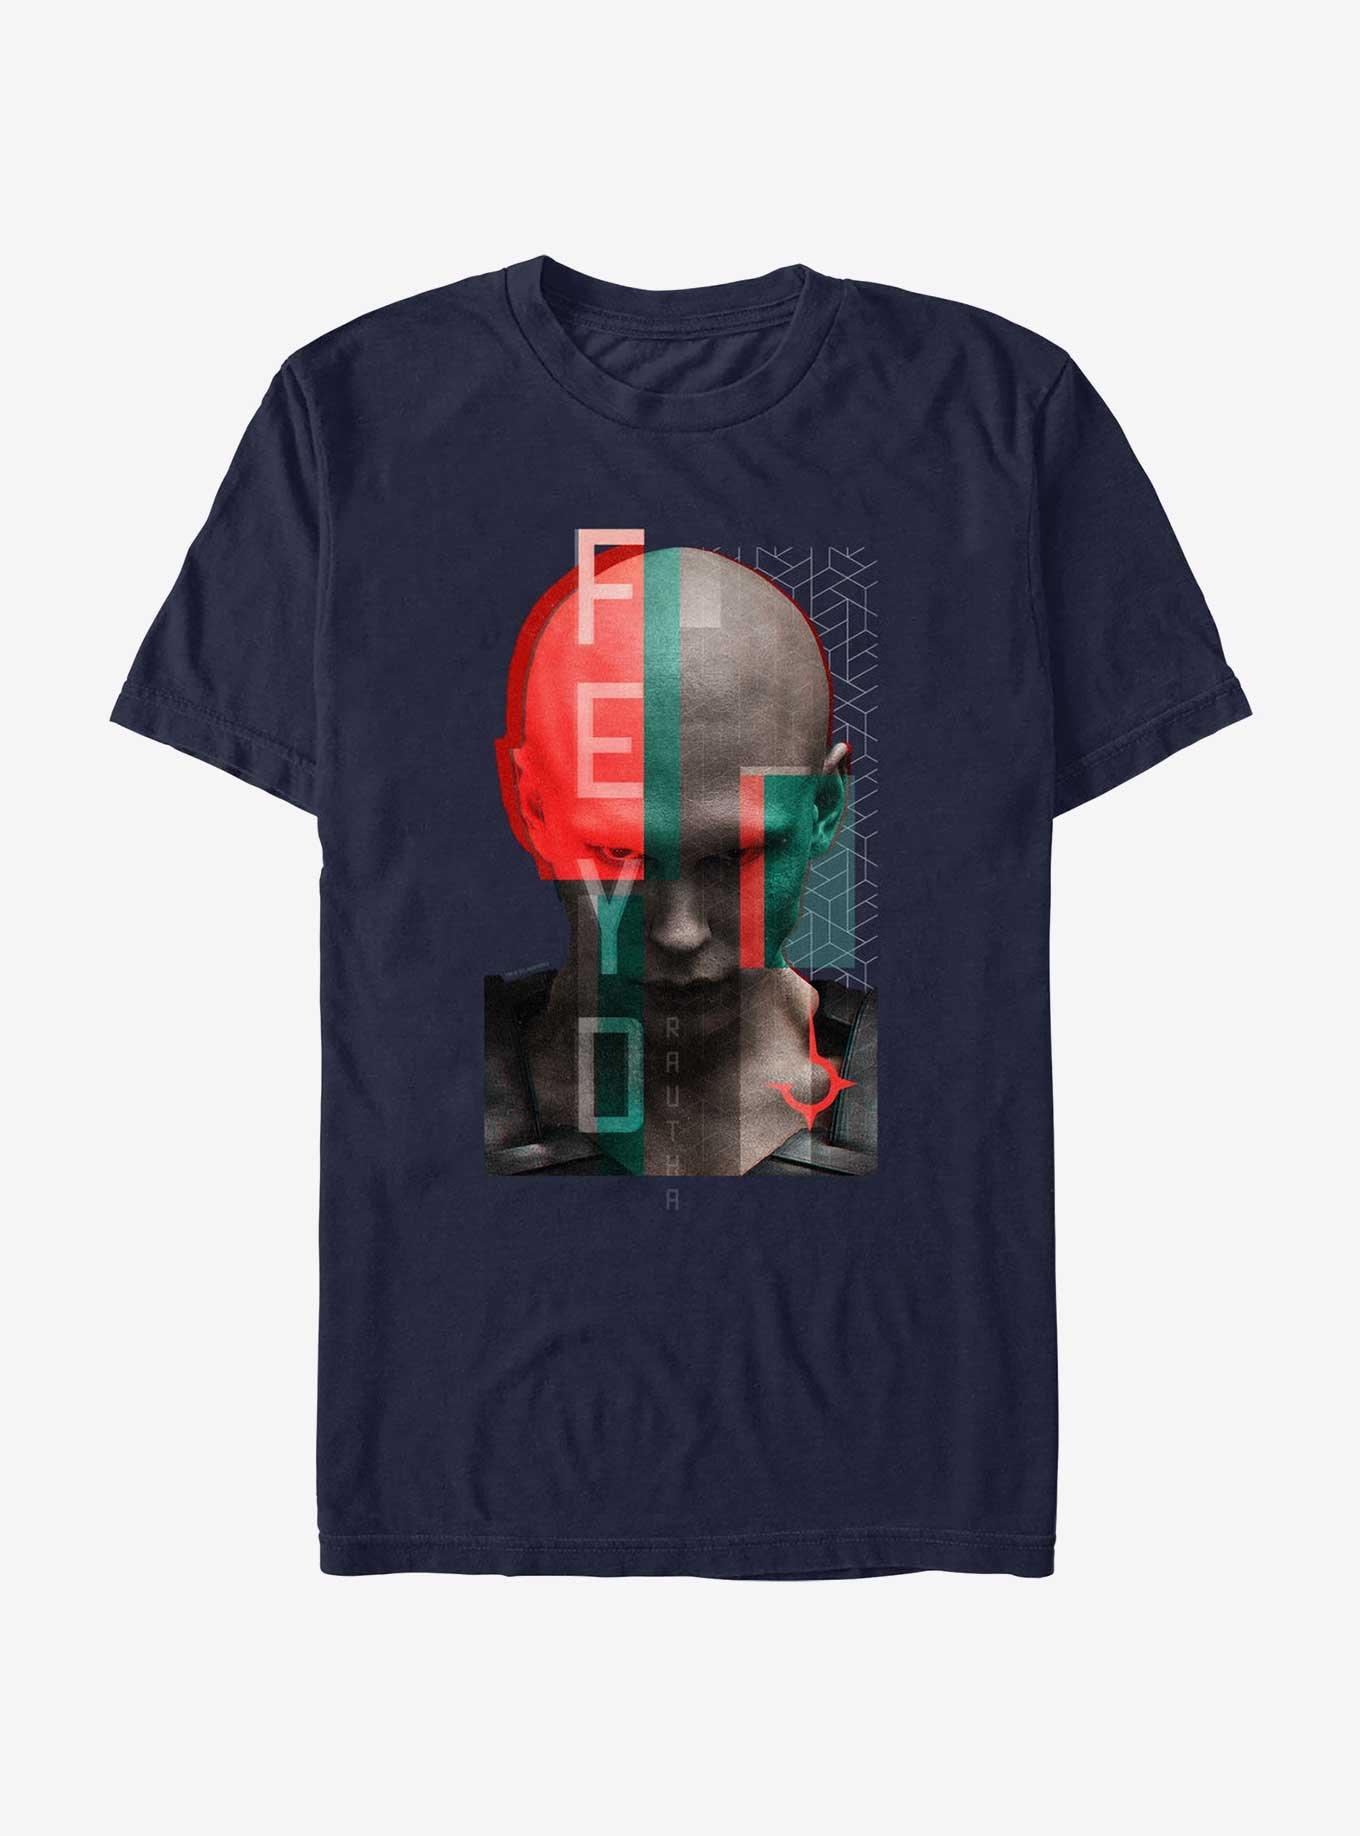 Dune: Part Two Feyd Bust T-Shirt, NAVY, hi-res